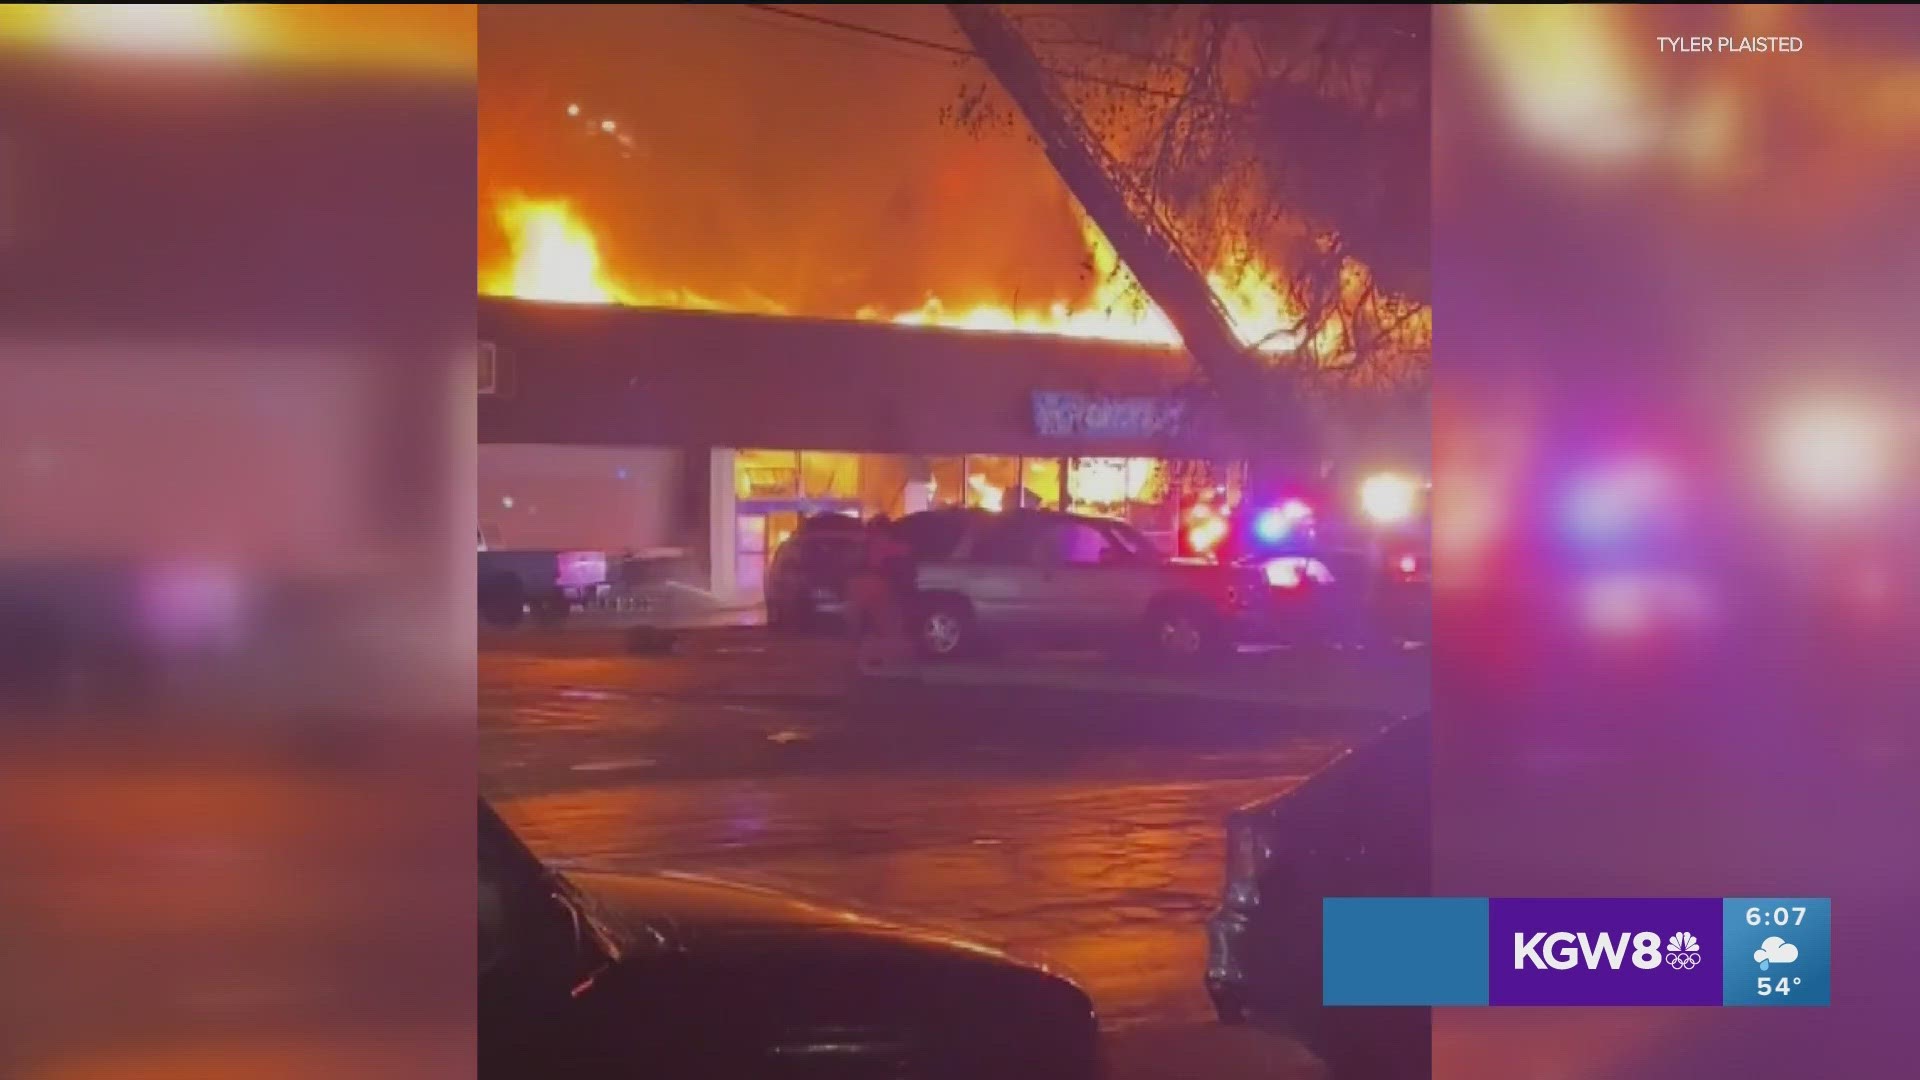 While no one was injured, Portland Fire and Rescue said that the strip mall is a total loss.